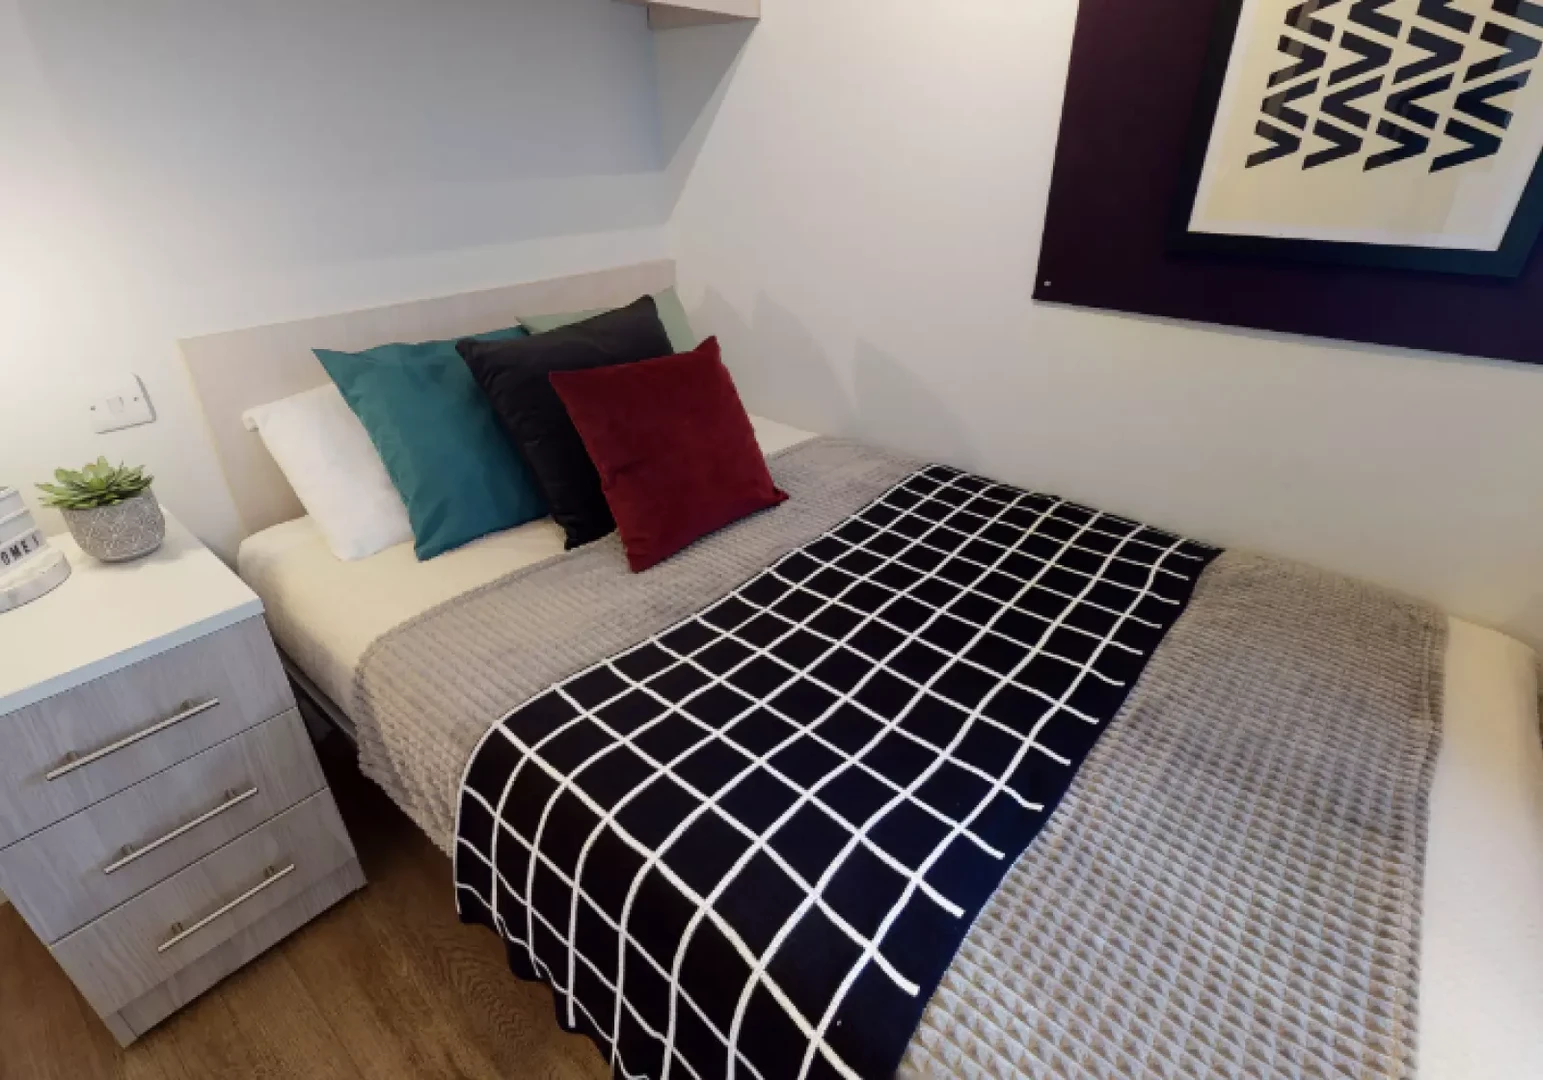 Room for rent in a shared flat in Brighton